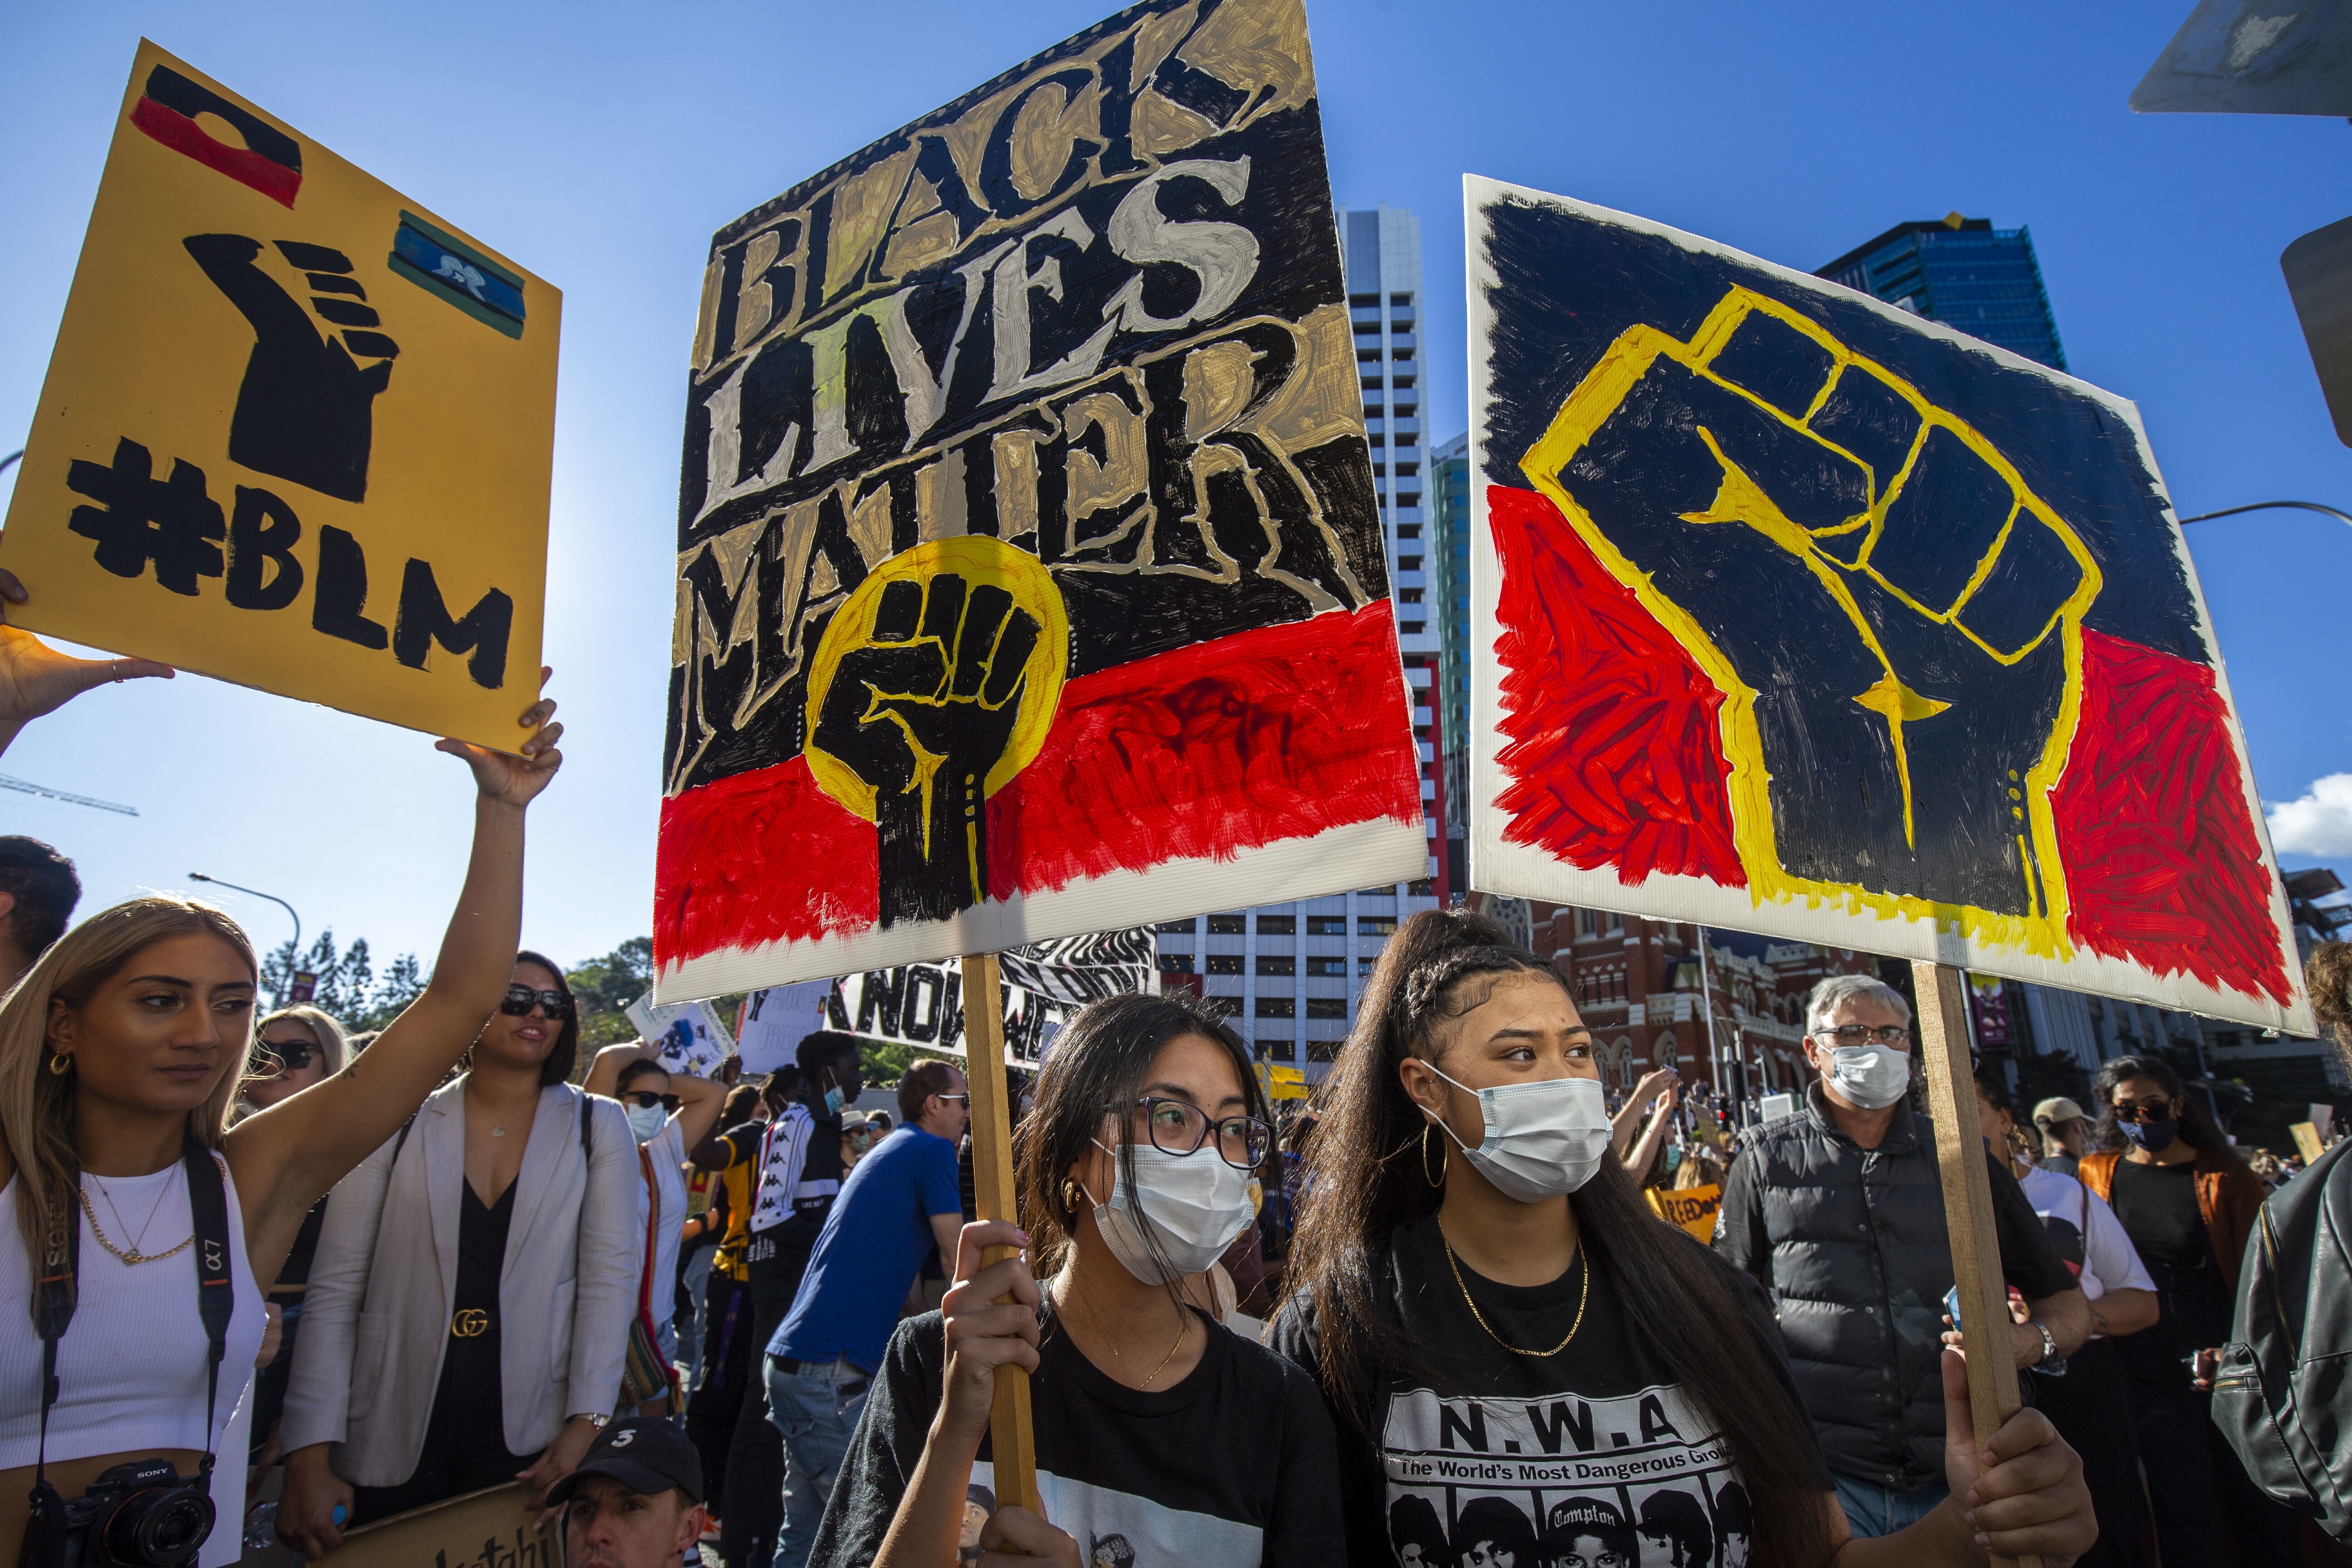 Protesters participate in a Black Lives Matter rally against racism in Brisbane on June 6. Photo: EPA-EFE